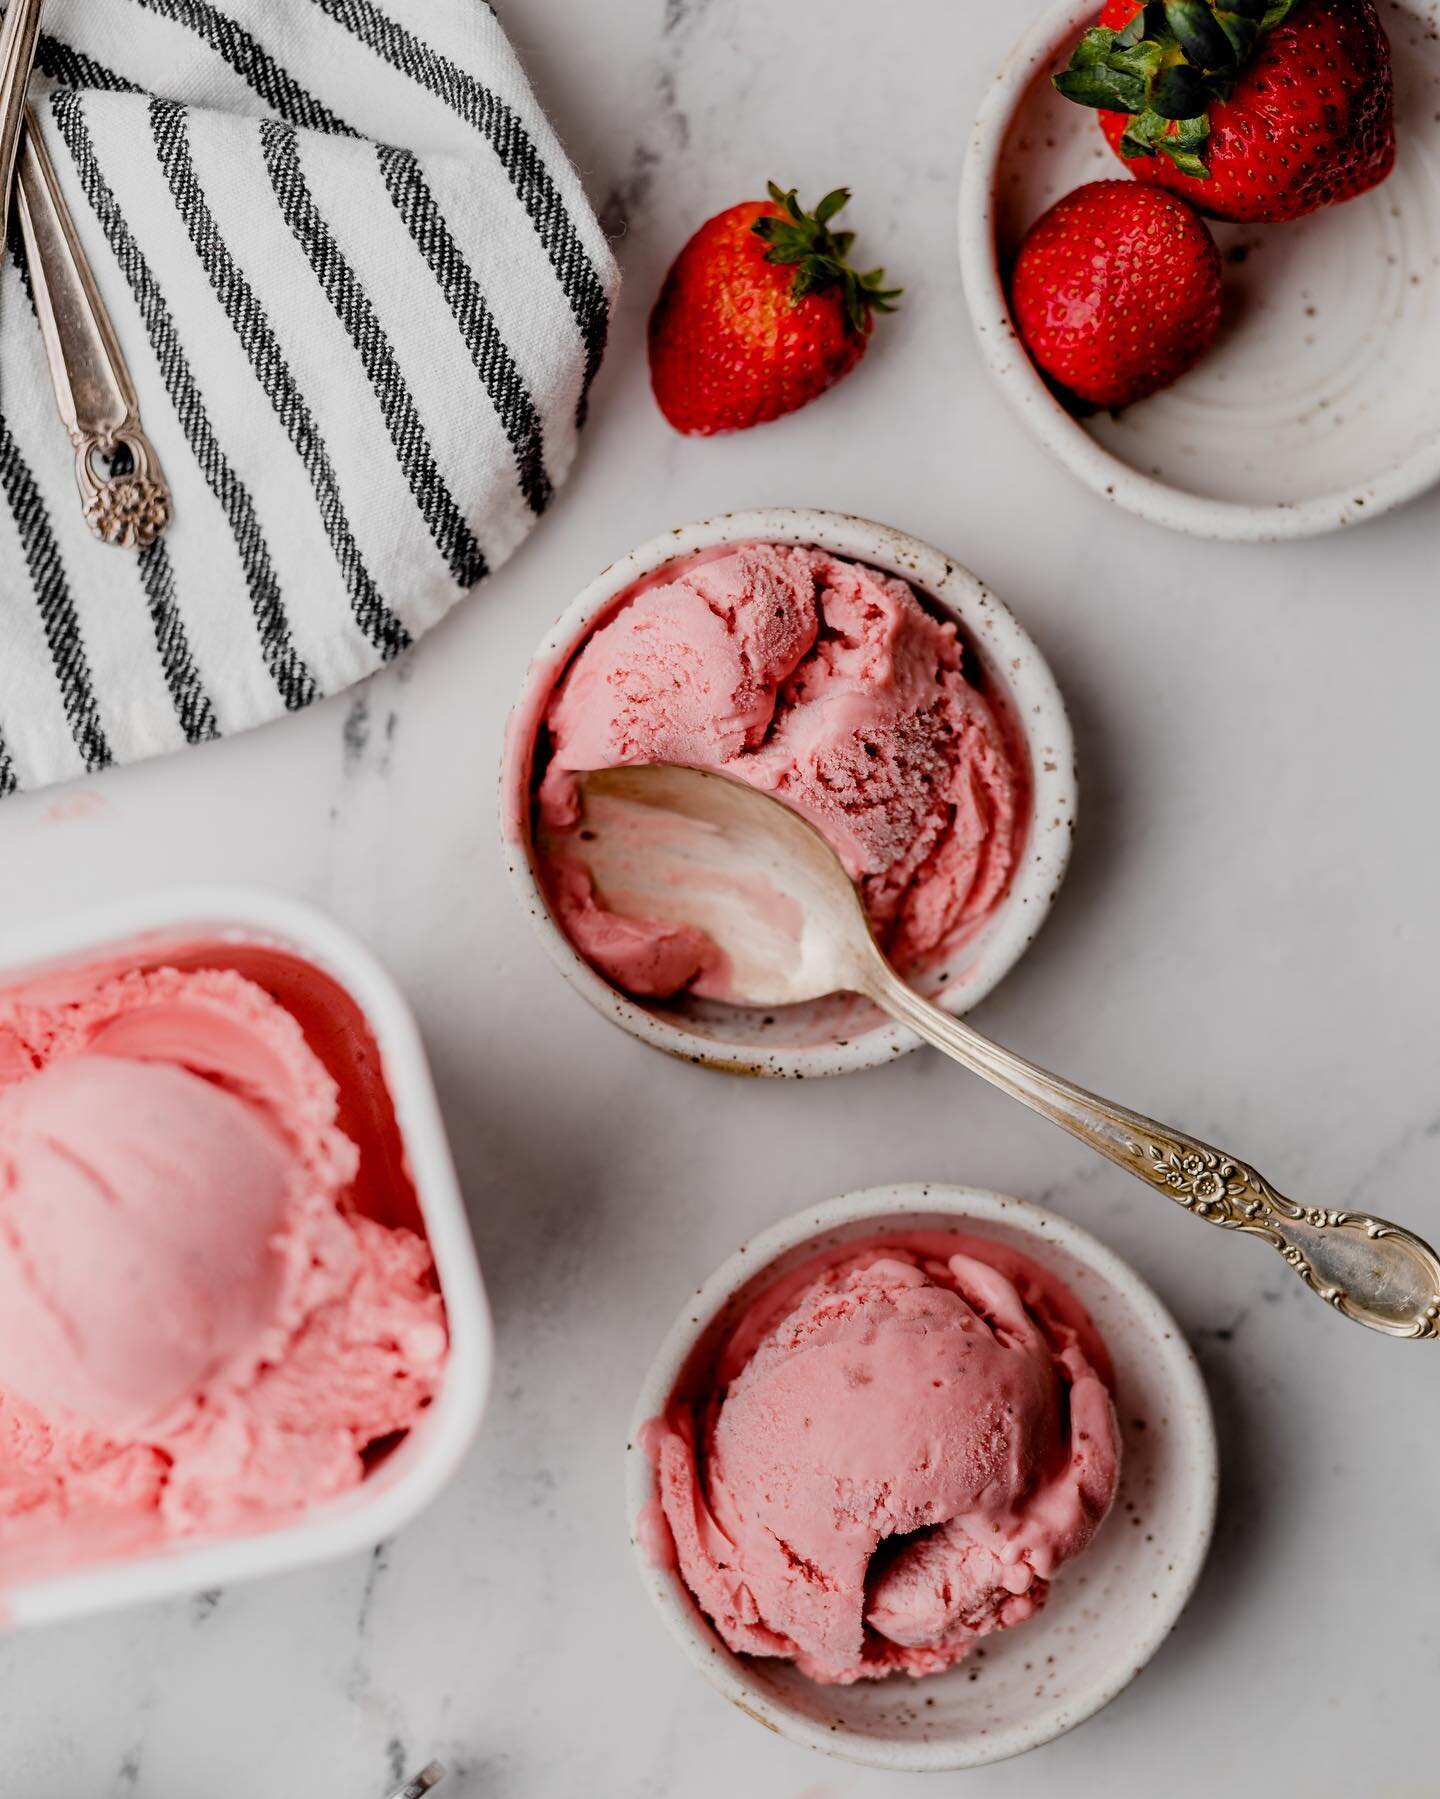 It&rsquo;s the unofficial last day of summer and  this homemade strawberry ice cream is the one thing I want more of. 

We ironically got the C O&mdash;you know what *right* after I picked all our fresh berries for the season, hoping to make copious 